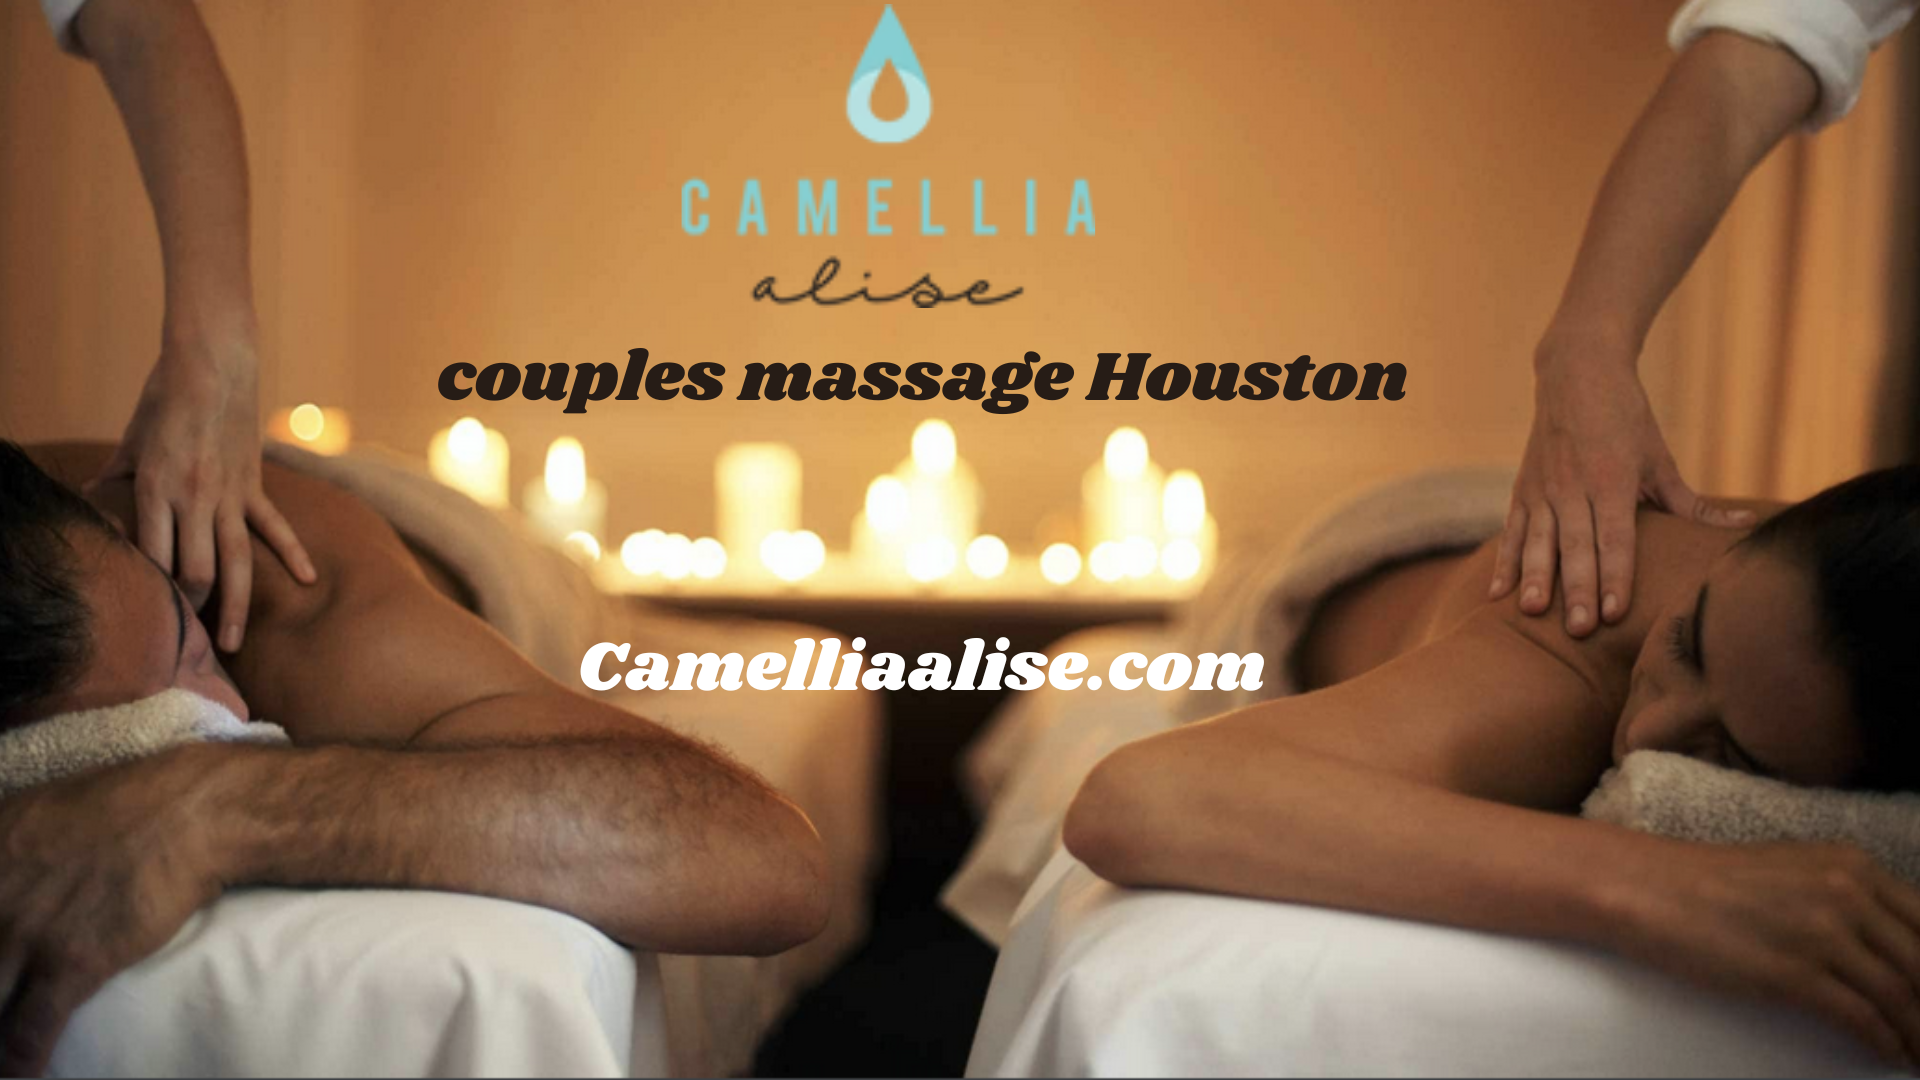 Houston on a Budget: Locating Affordable couples massage Houston